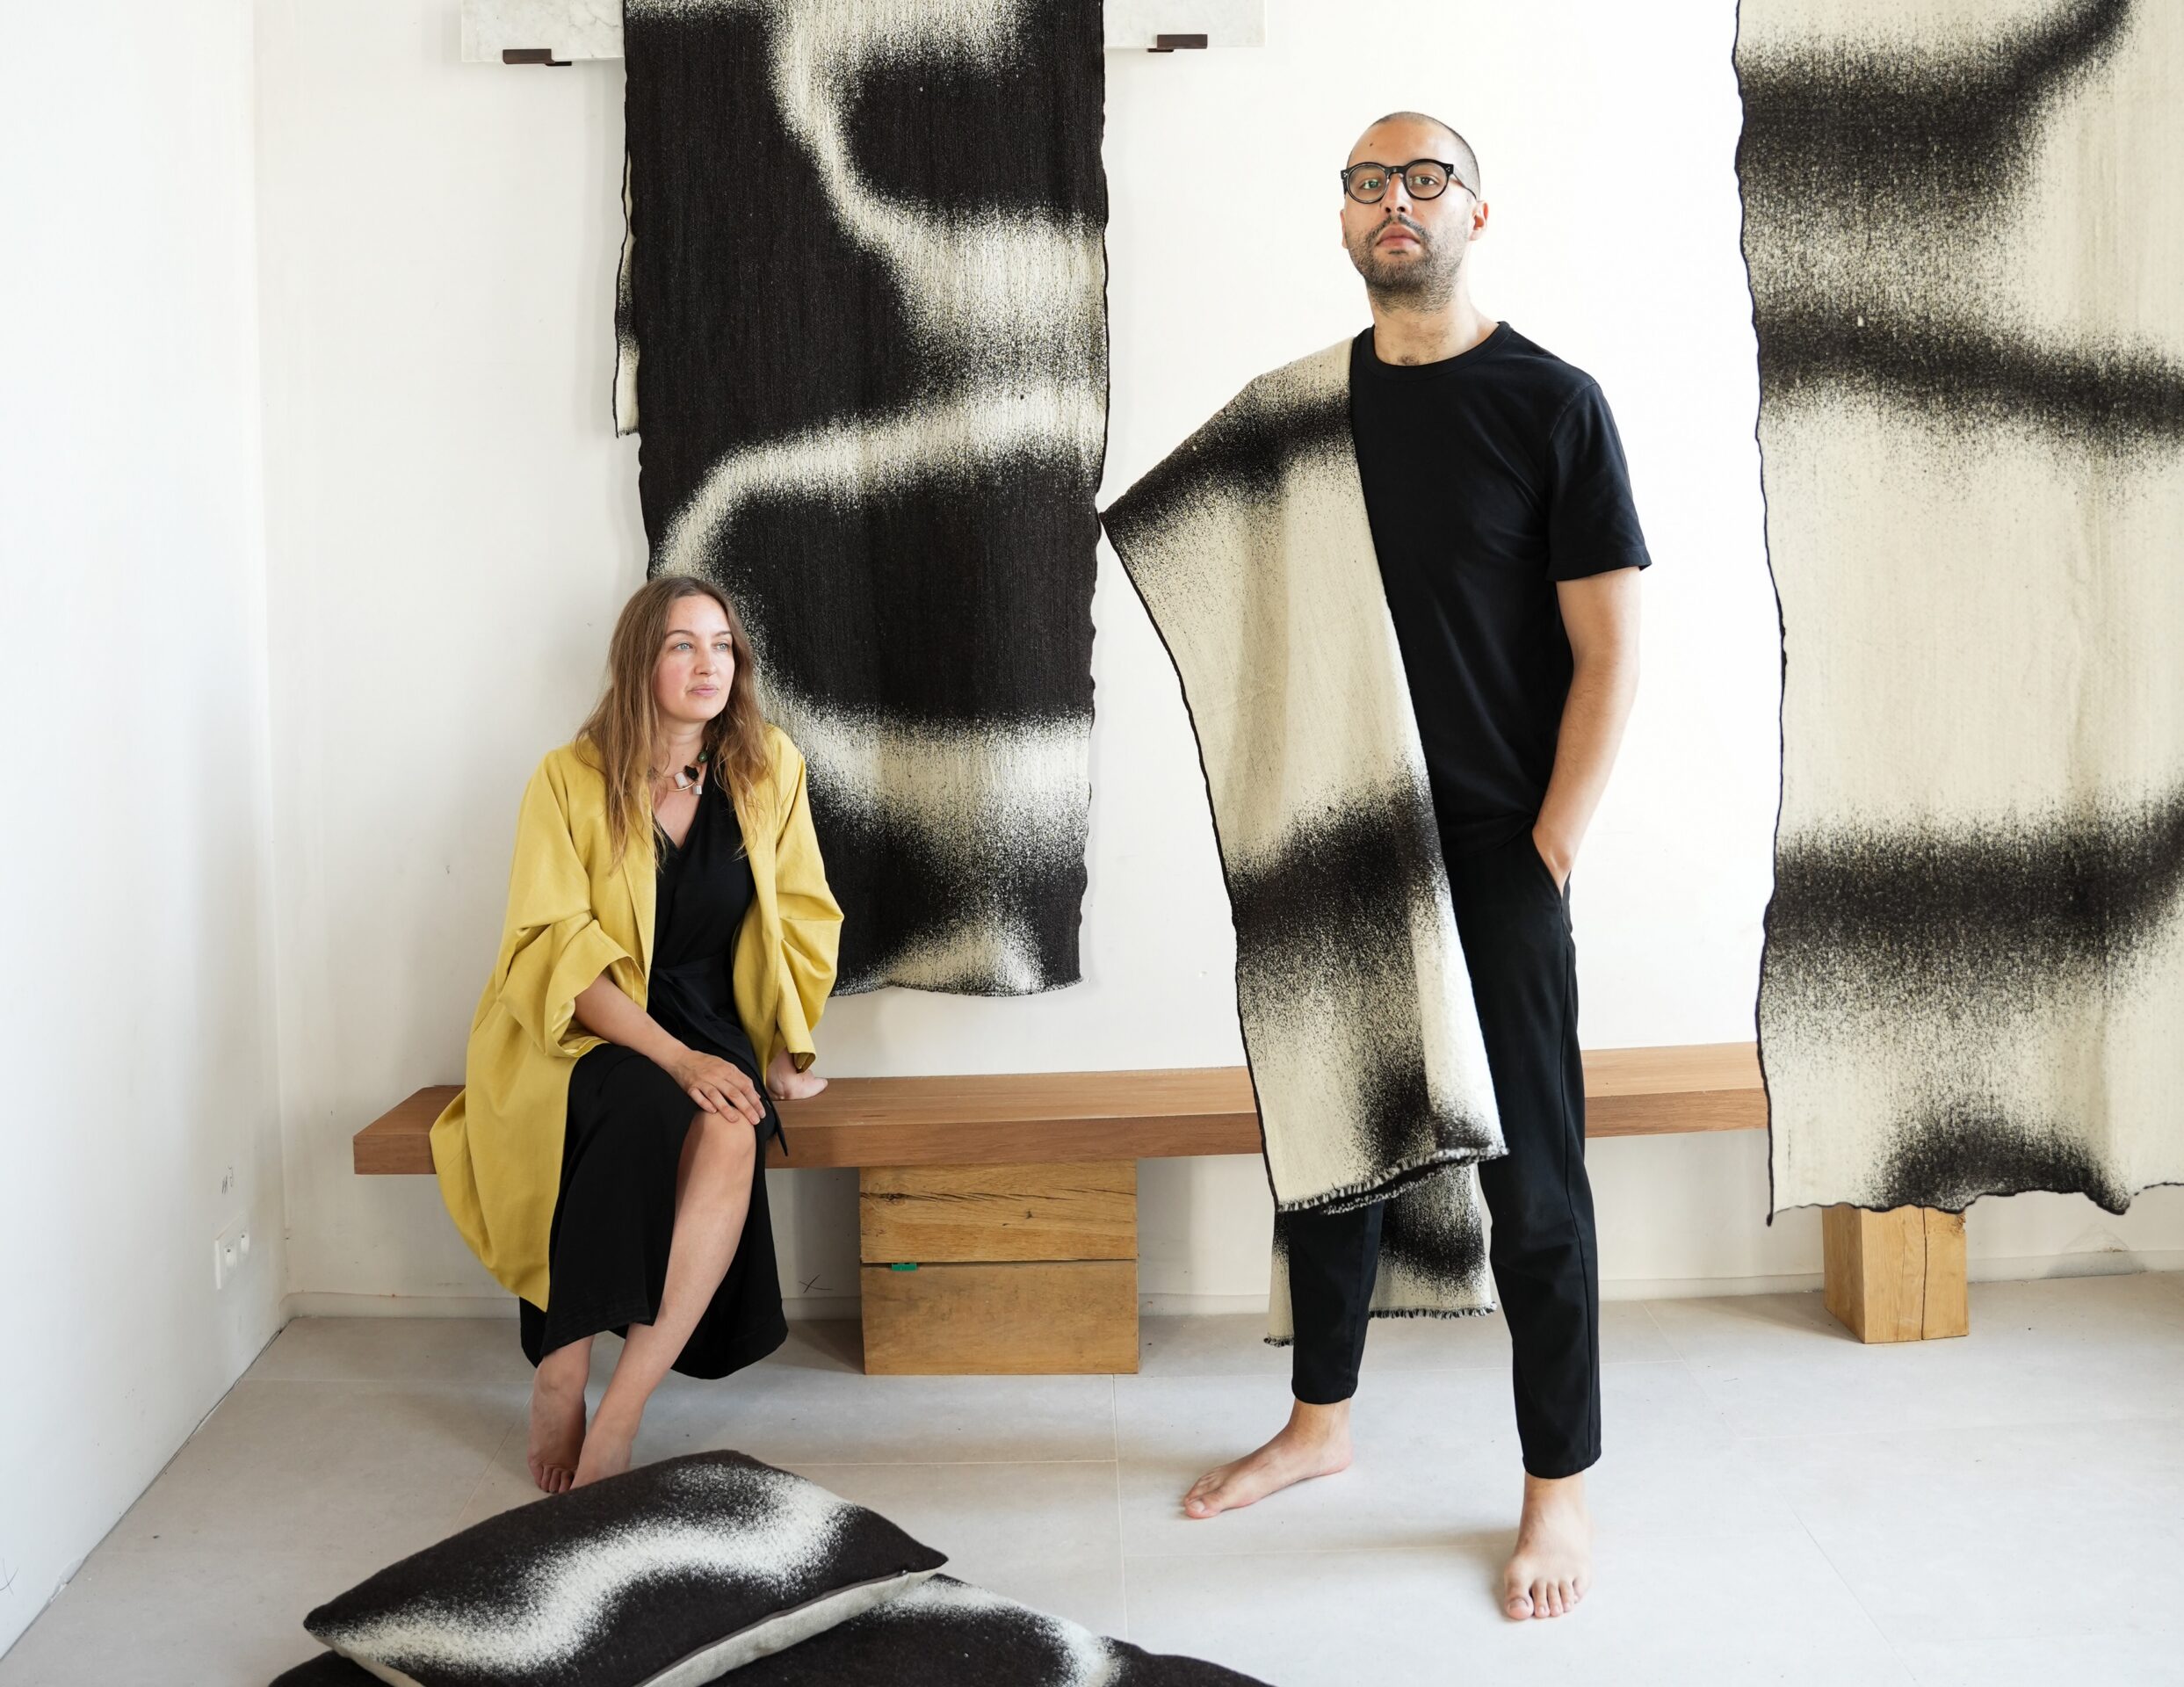 The artists finding ways to revive Belgium's fading wool traditions